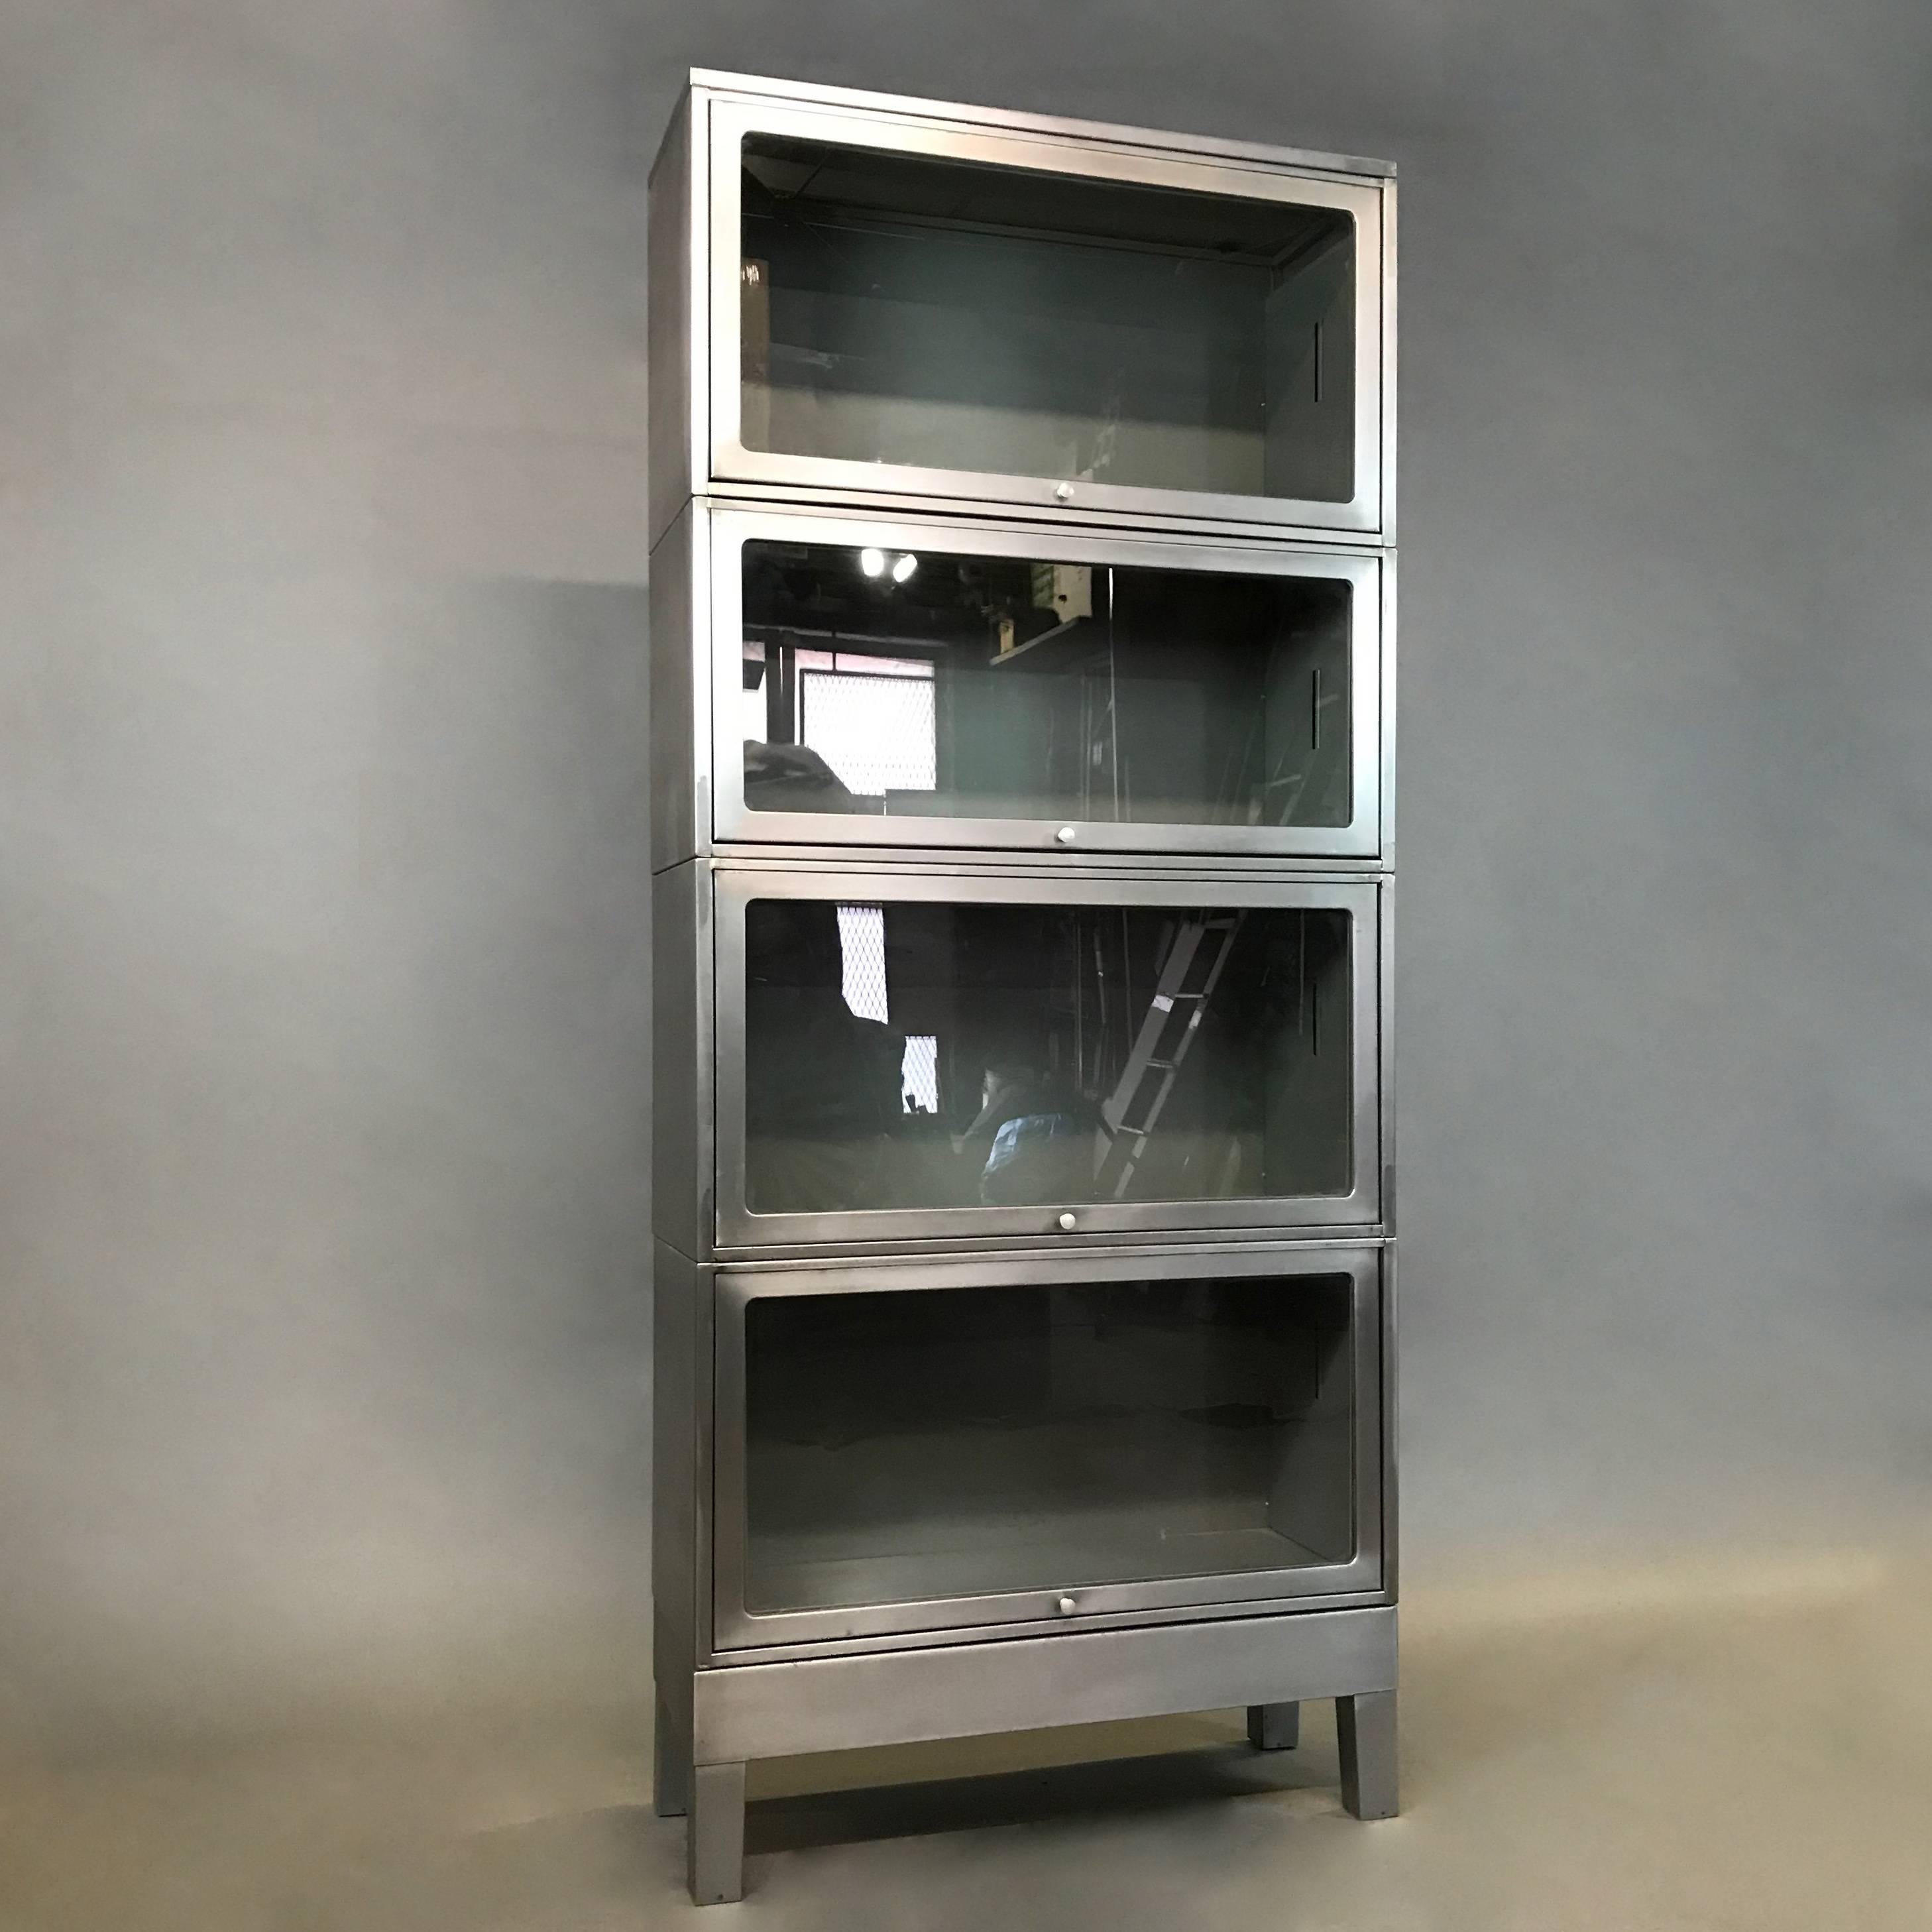 Mid century, Industrial, barrister bookcase, features four interlocking, stackable cases with brushed steel exterior and original gray paint interiors and glass front doors that slide to open. Three cases measure 17